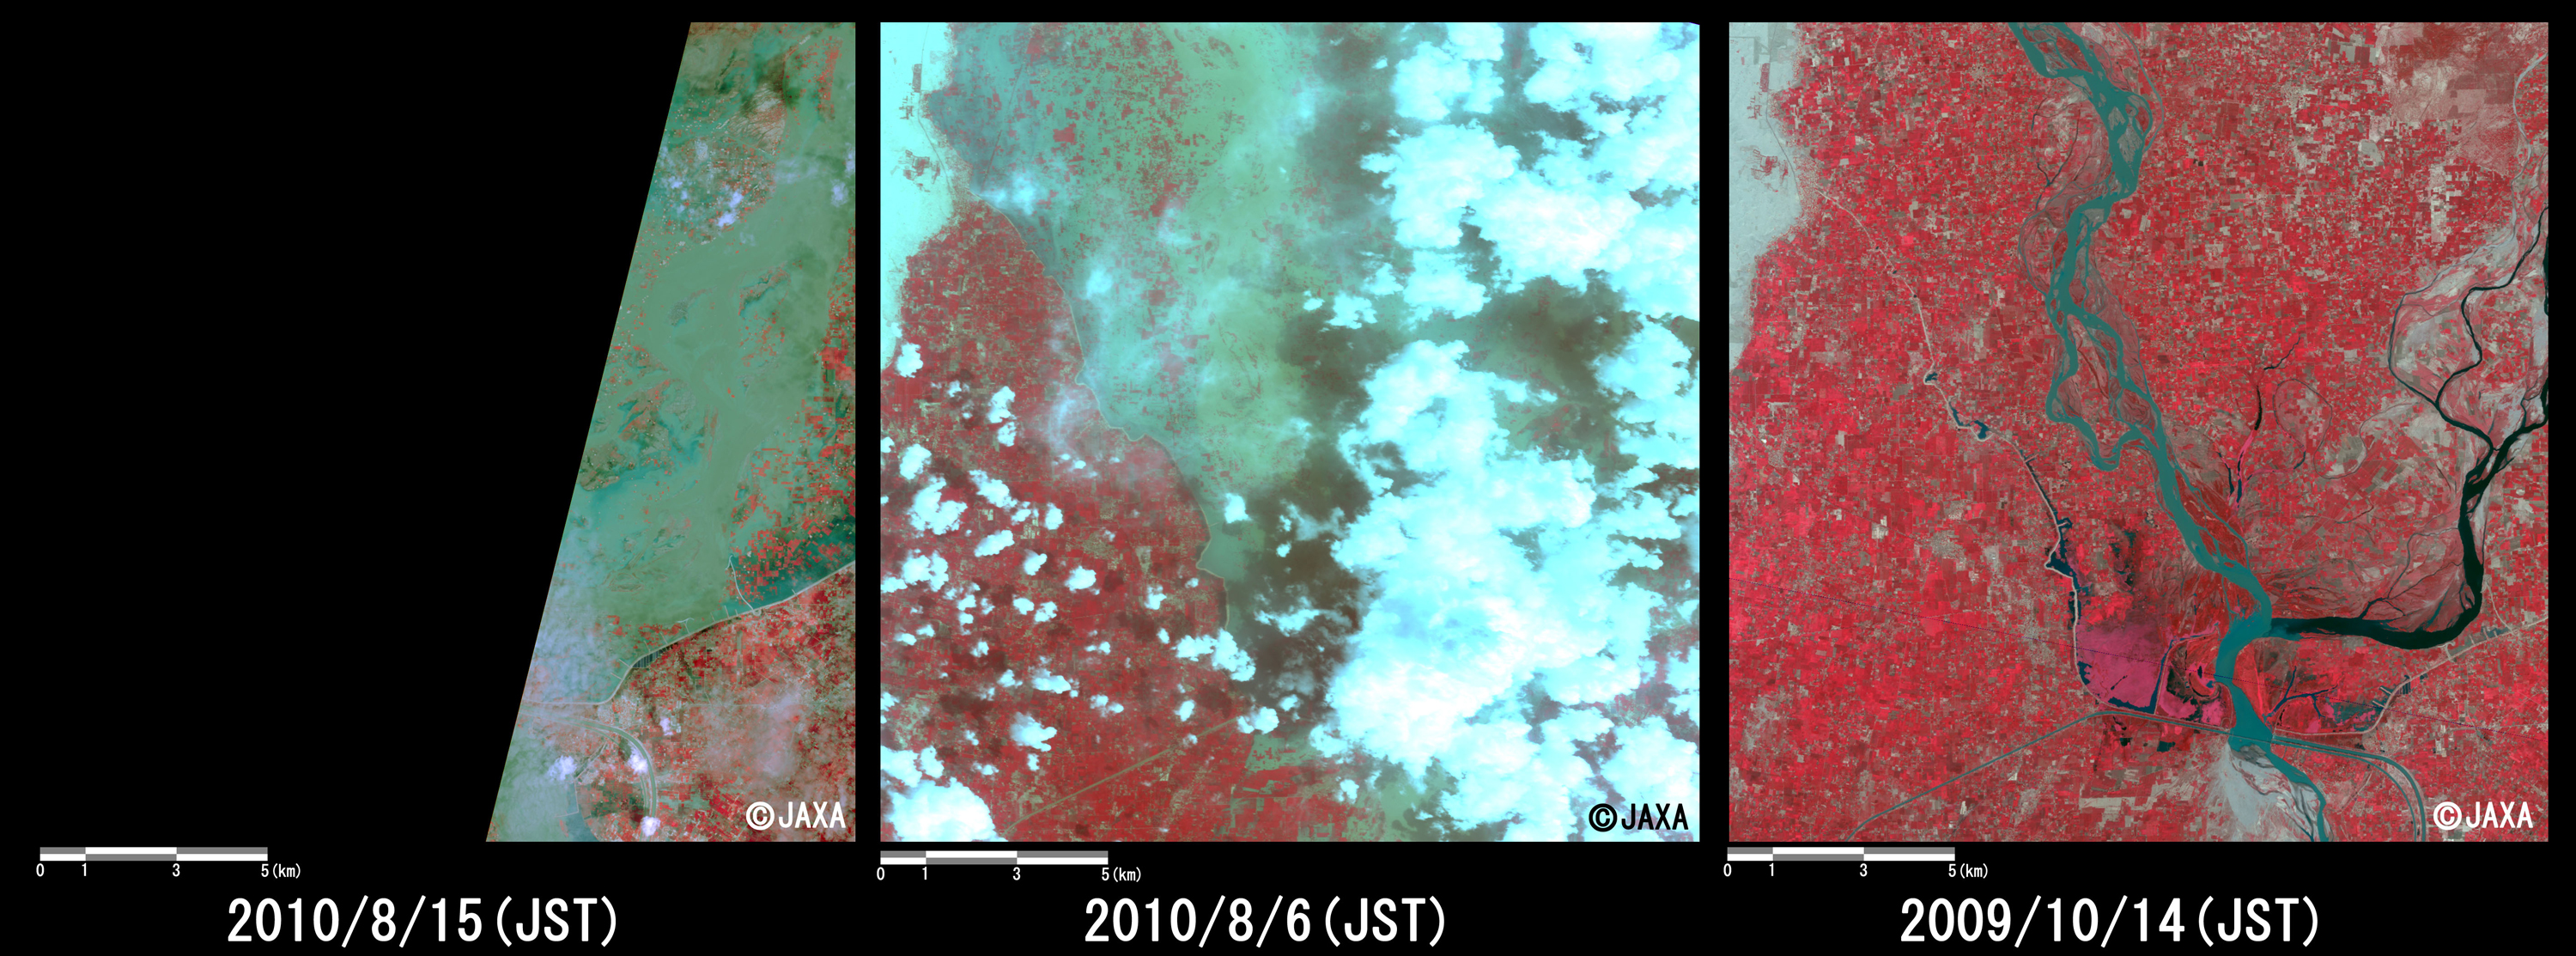 Fig. 2: Enlarged images of the swollen rivers at Alhara Hazari (324 square kilometers, left: August 15, 2010; middle: August 6, 2010; right: October 14, 2009).